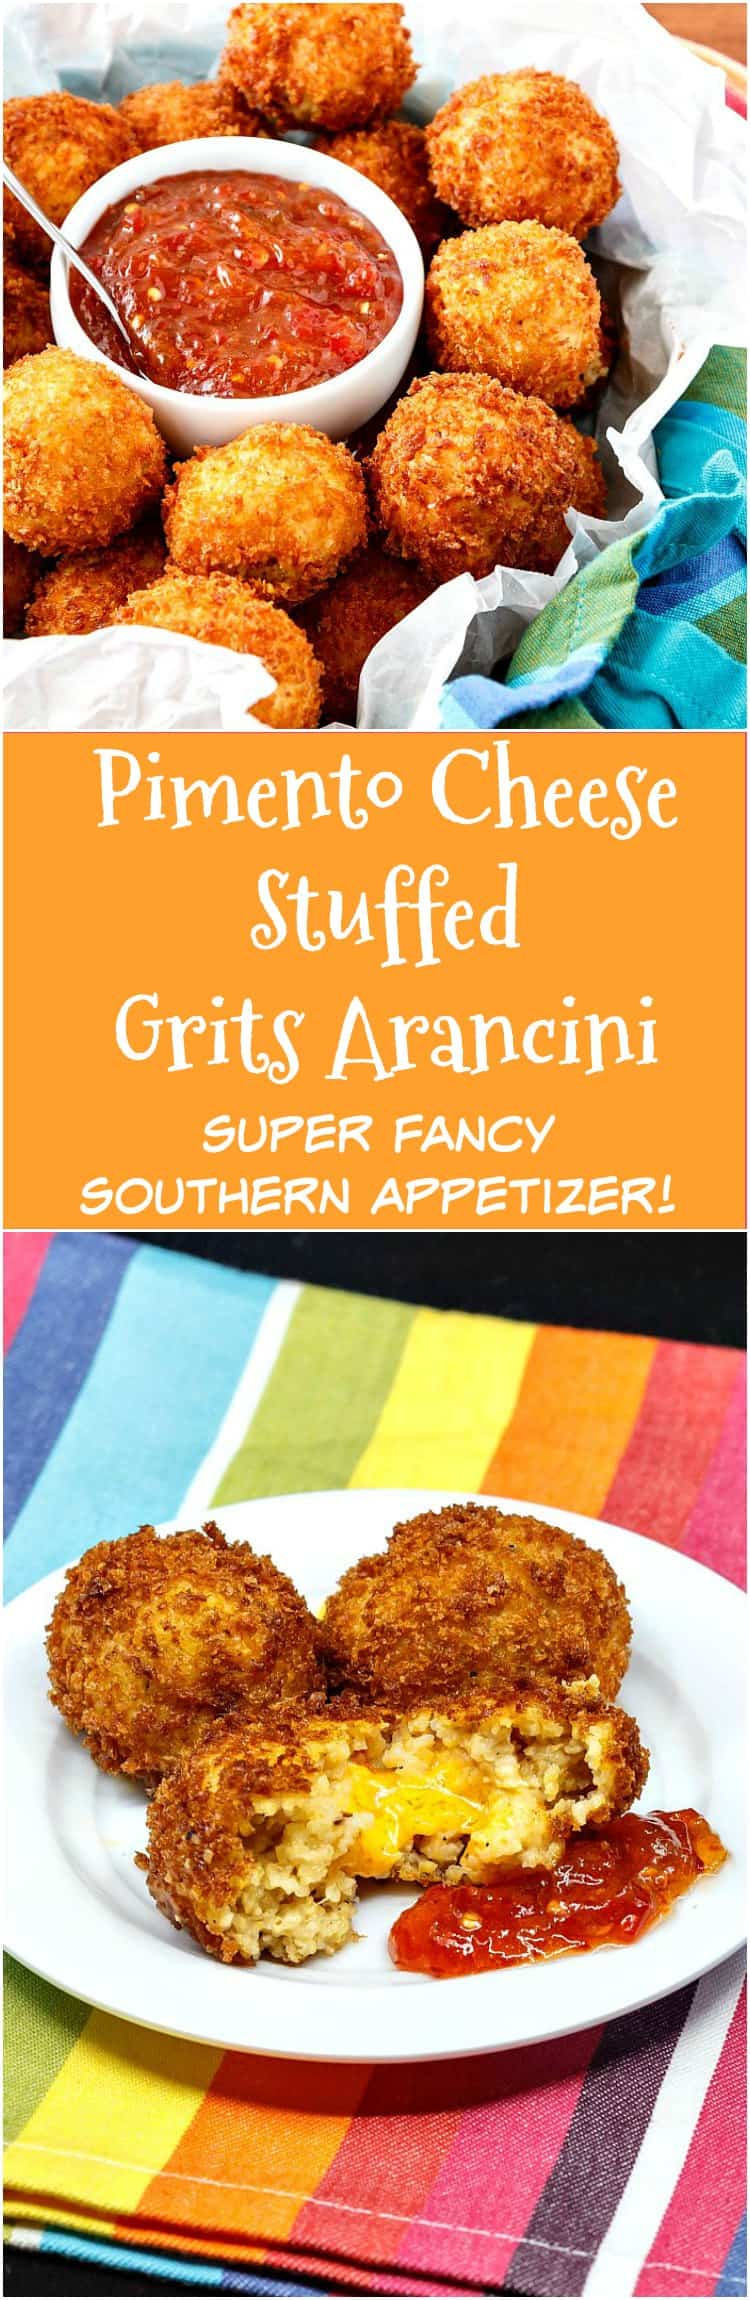 Bowl of arancini and text reads: "Pimento Cheese Stuffed Grits Arancini super fancy southern appetizer".